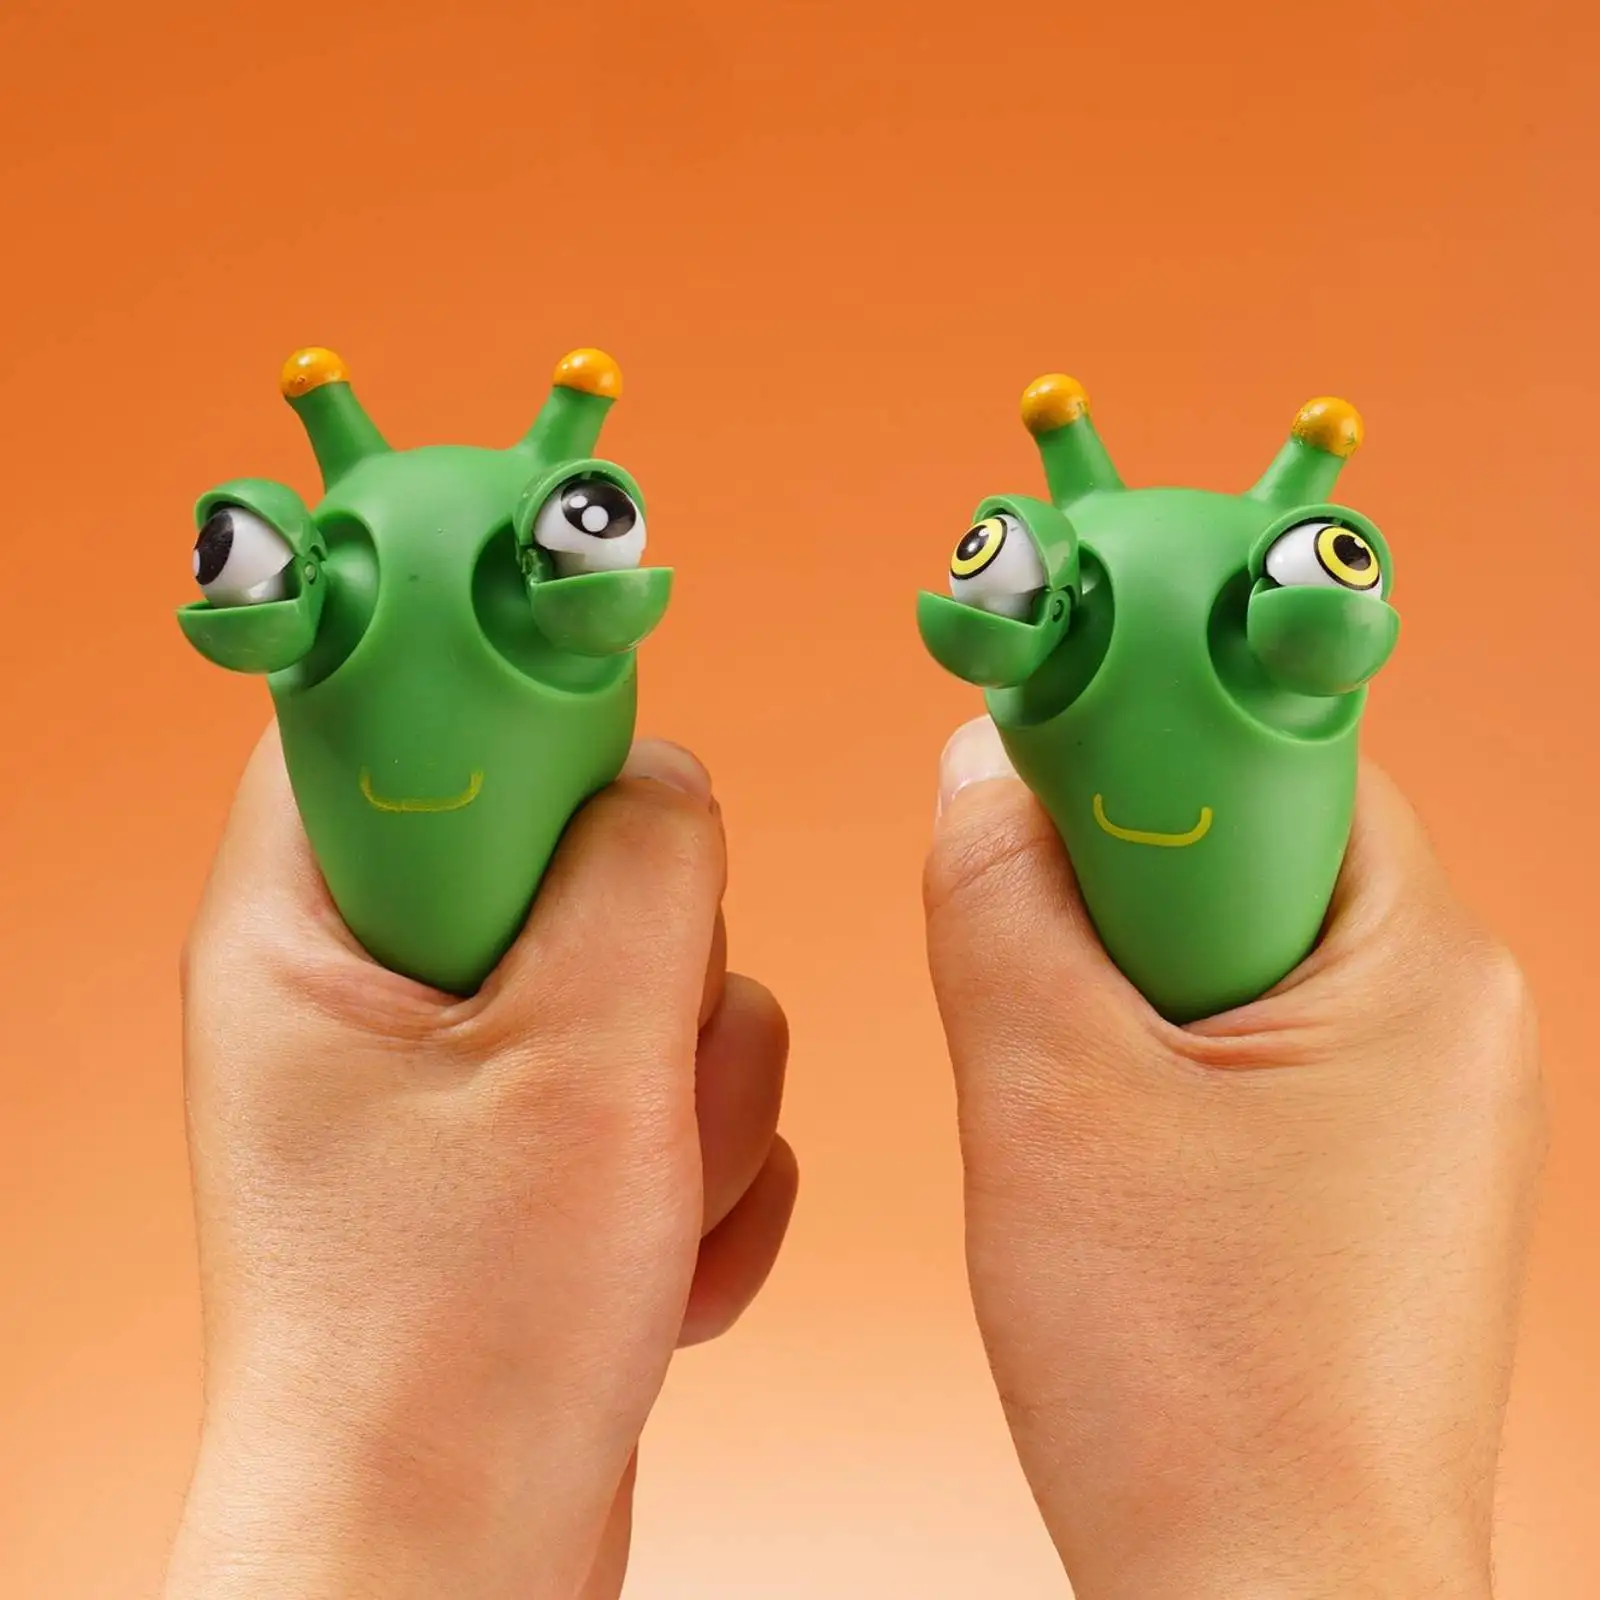 

New Grass Worm Pinch Toy Squishy Toy Green Eye Popping Worm Squeeze Toy Stress Reliever Anti-stress Fidget Christmas Kids Gifts